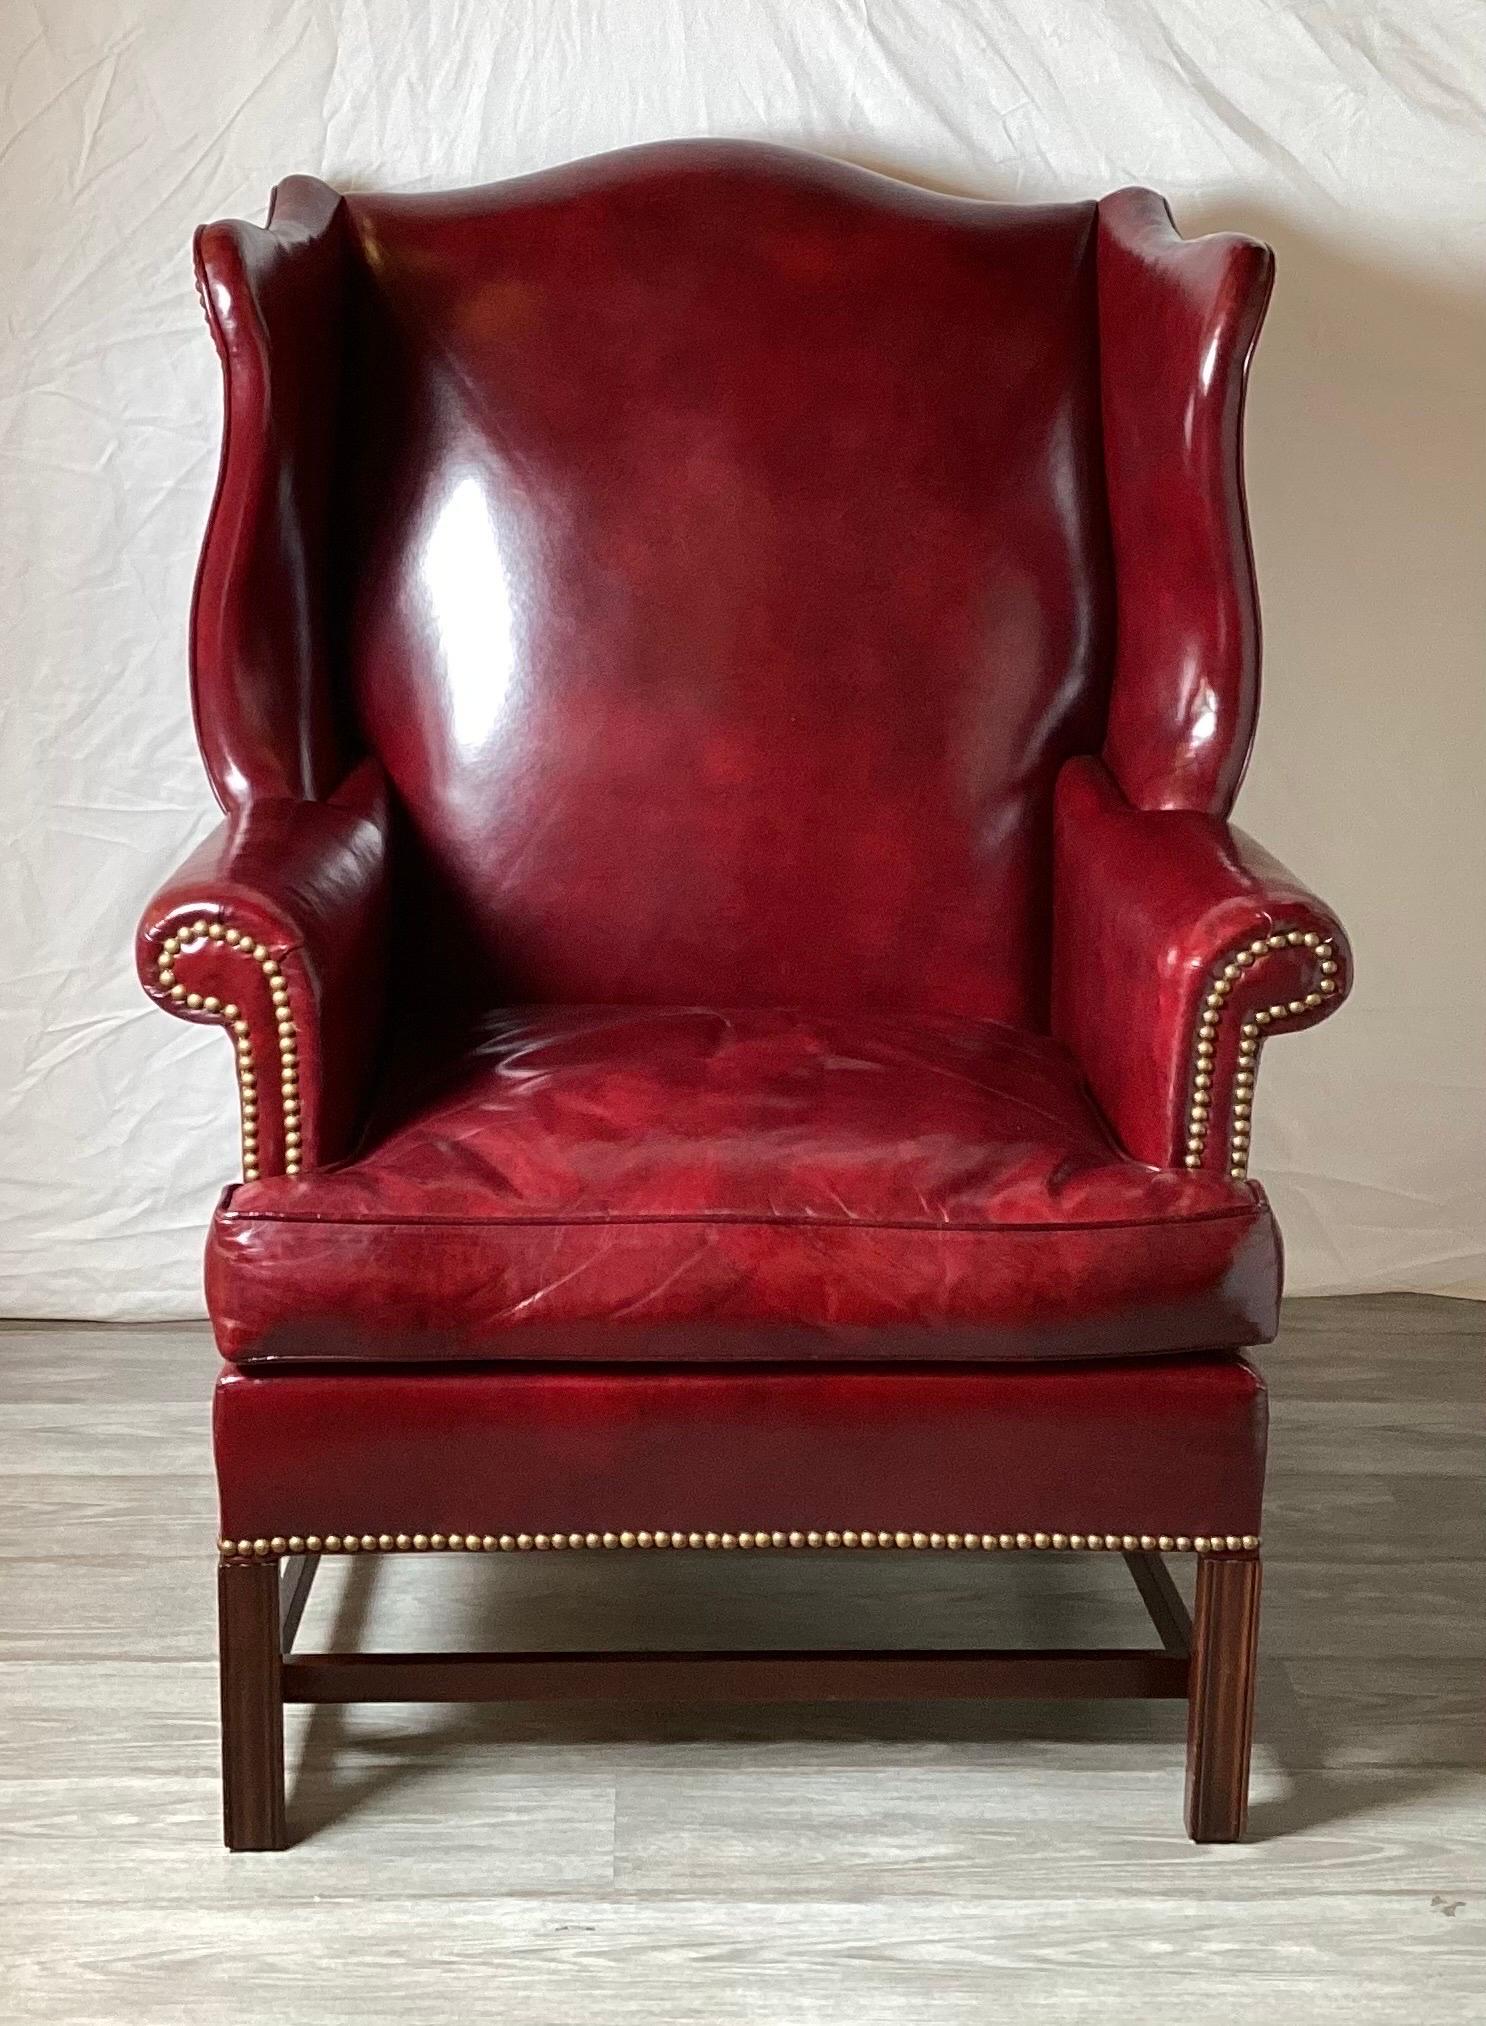 A pair of Classic and shapely cordovan leather wing chairs with brass nail head trim. The sturdy kiln dried hardwood frames with 8 way hand tied springs with a mahogany finished leg. Made exclusively for one of the top furniture retailers in